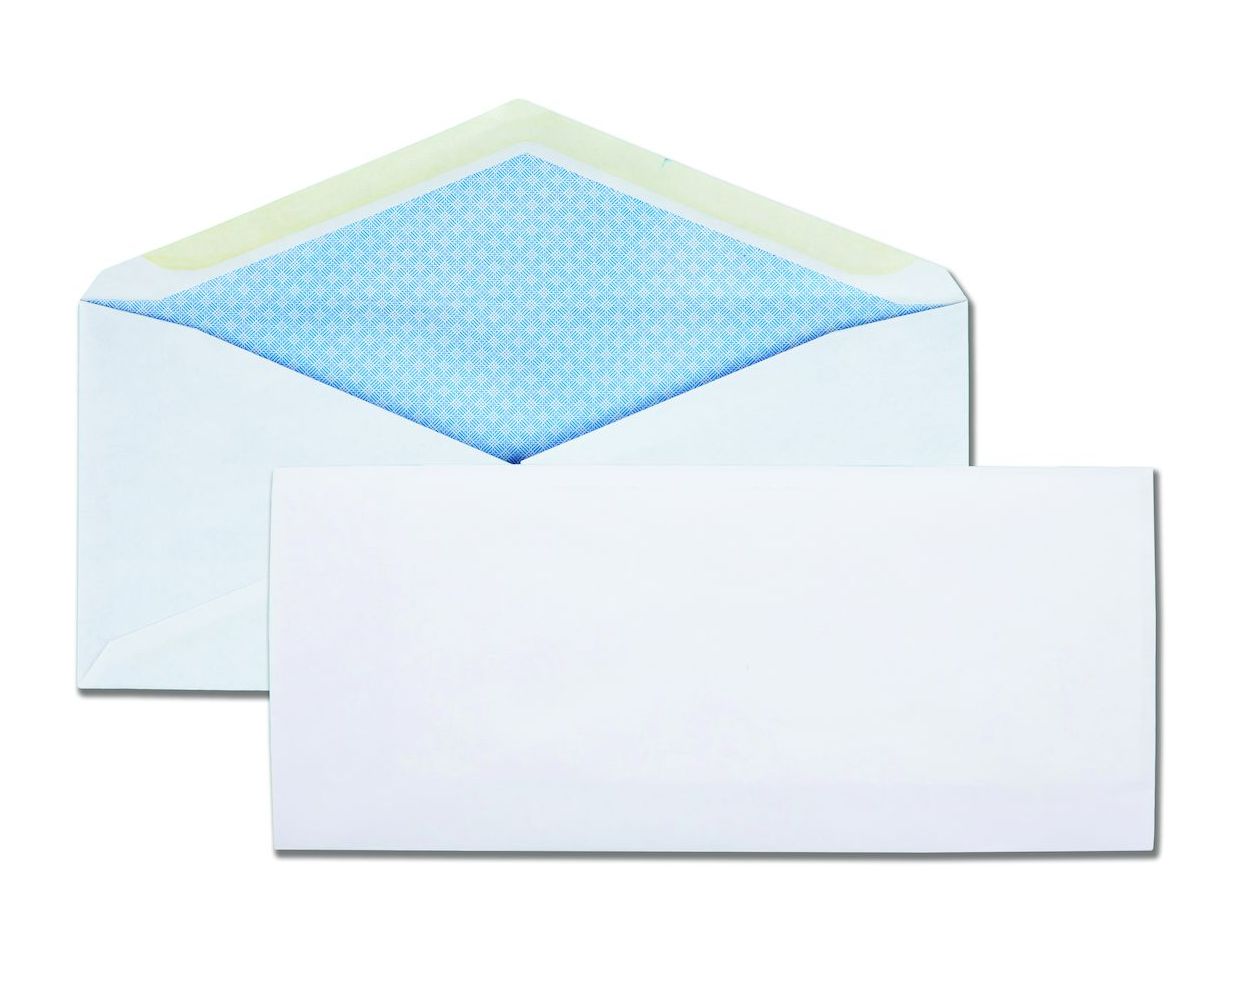 10 Security Tinted V Flap Business Envelopes Gummed Flap Great for High Speed Inserting Equipment White Wove 500 per Box